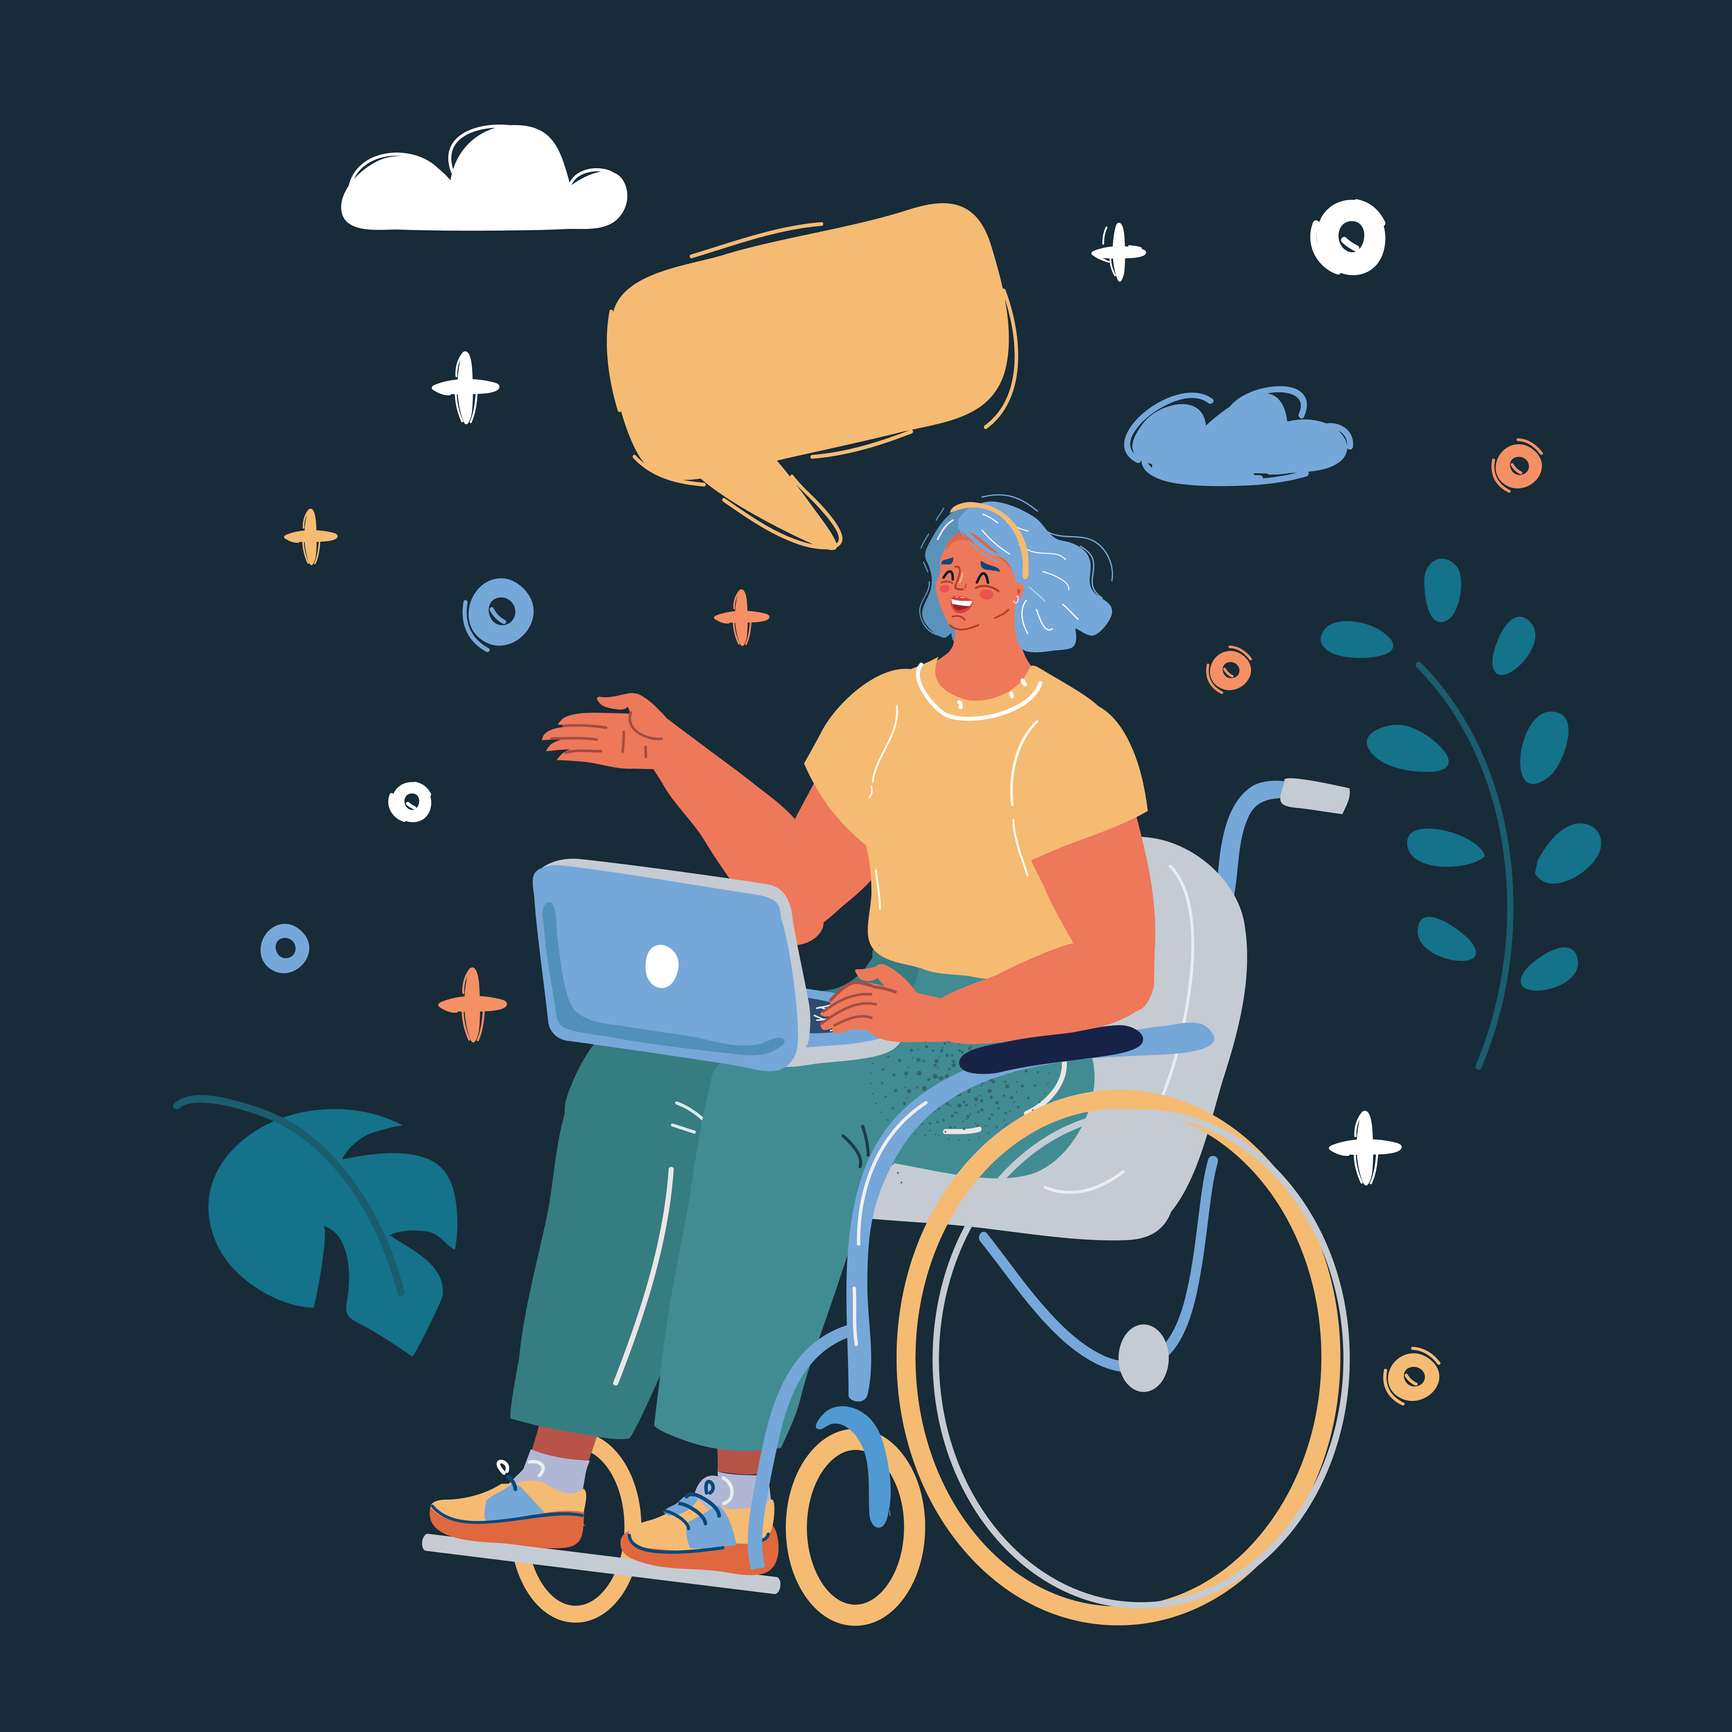 Illustration of woman in a wheelchair. She has a laptop balanced on her knees and there is a speech bubble above her head.